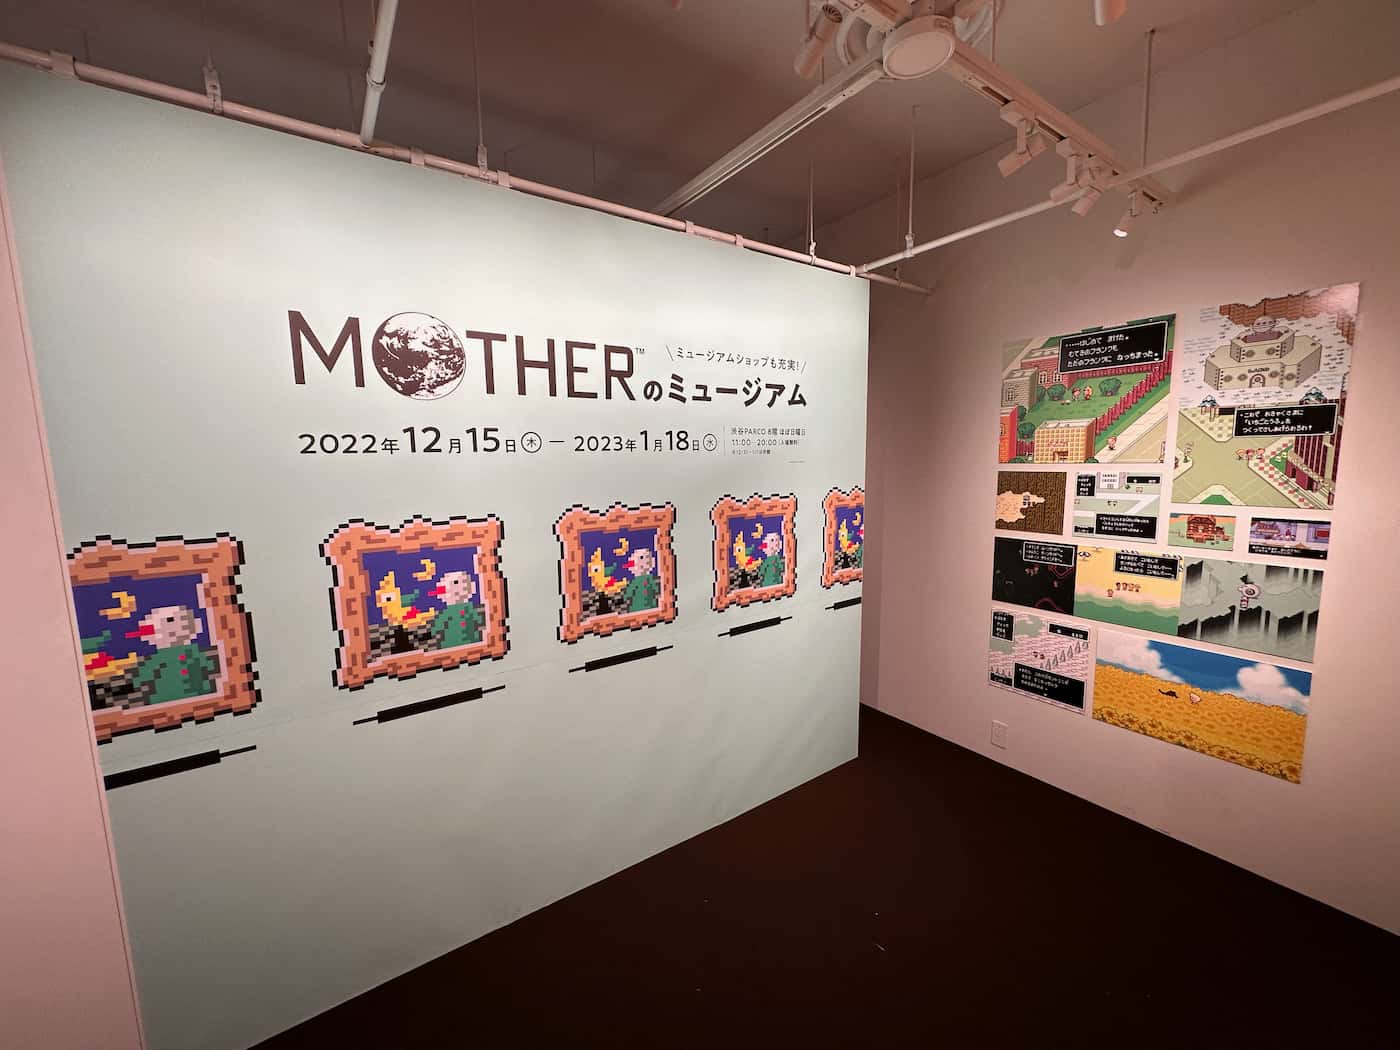 Entrance of the Mother Museum at Shibuya Parco.